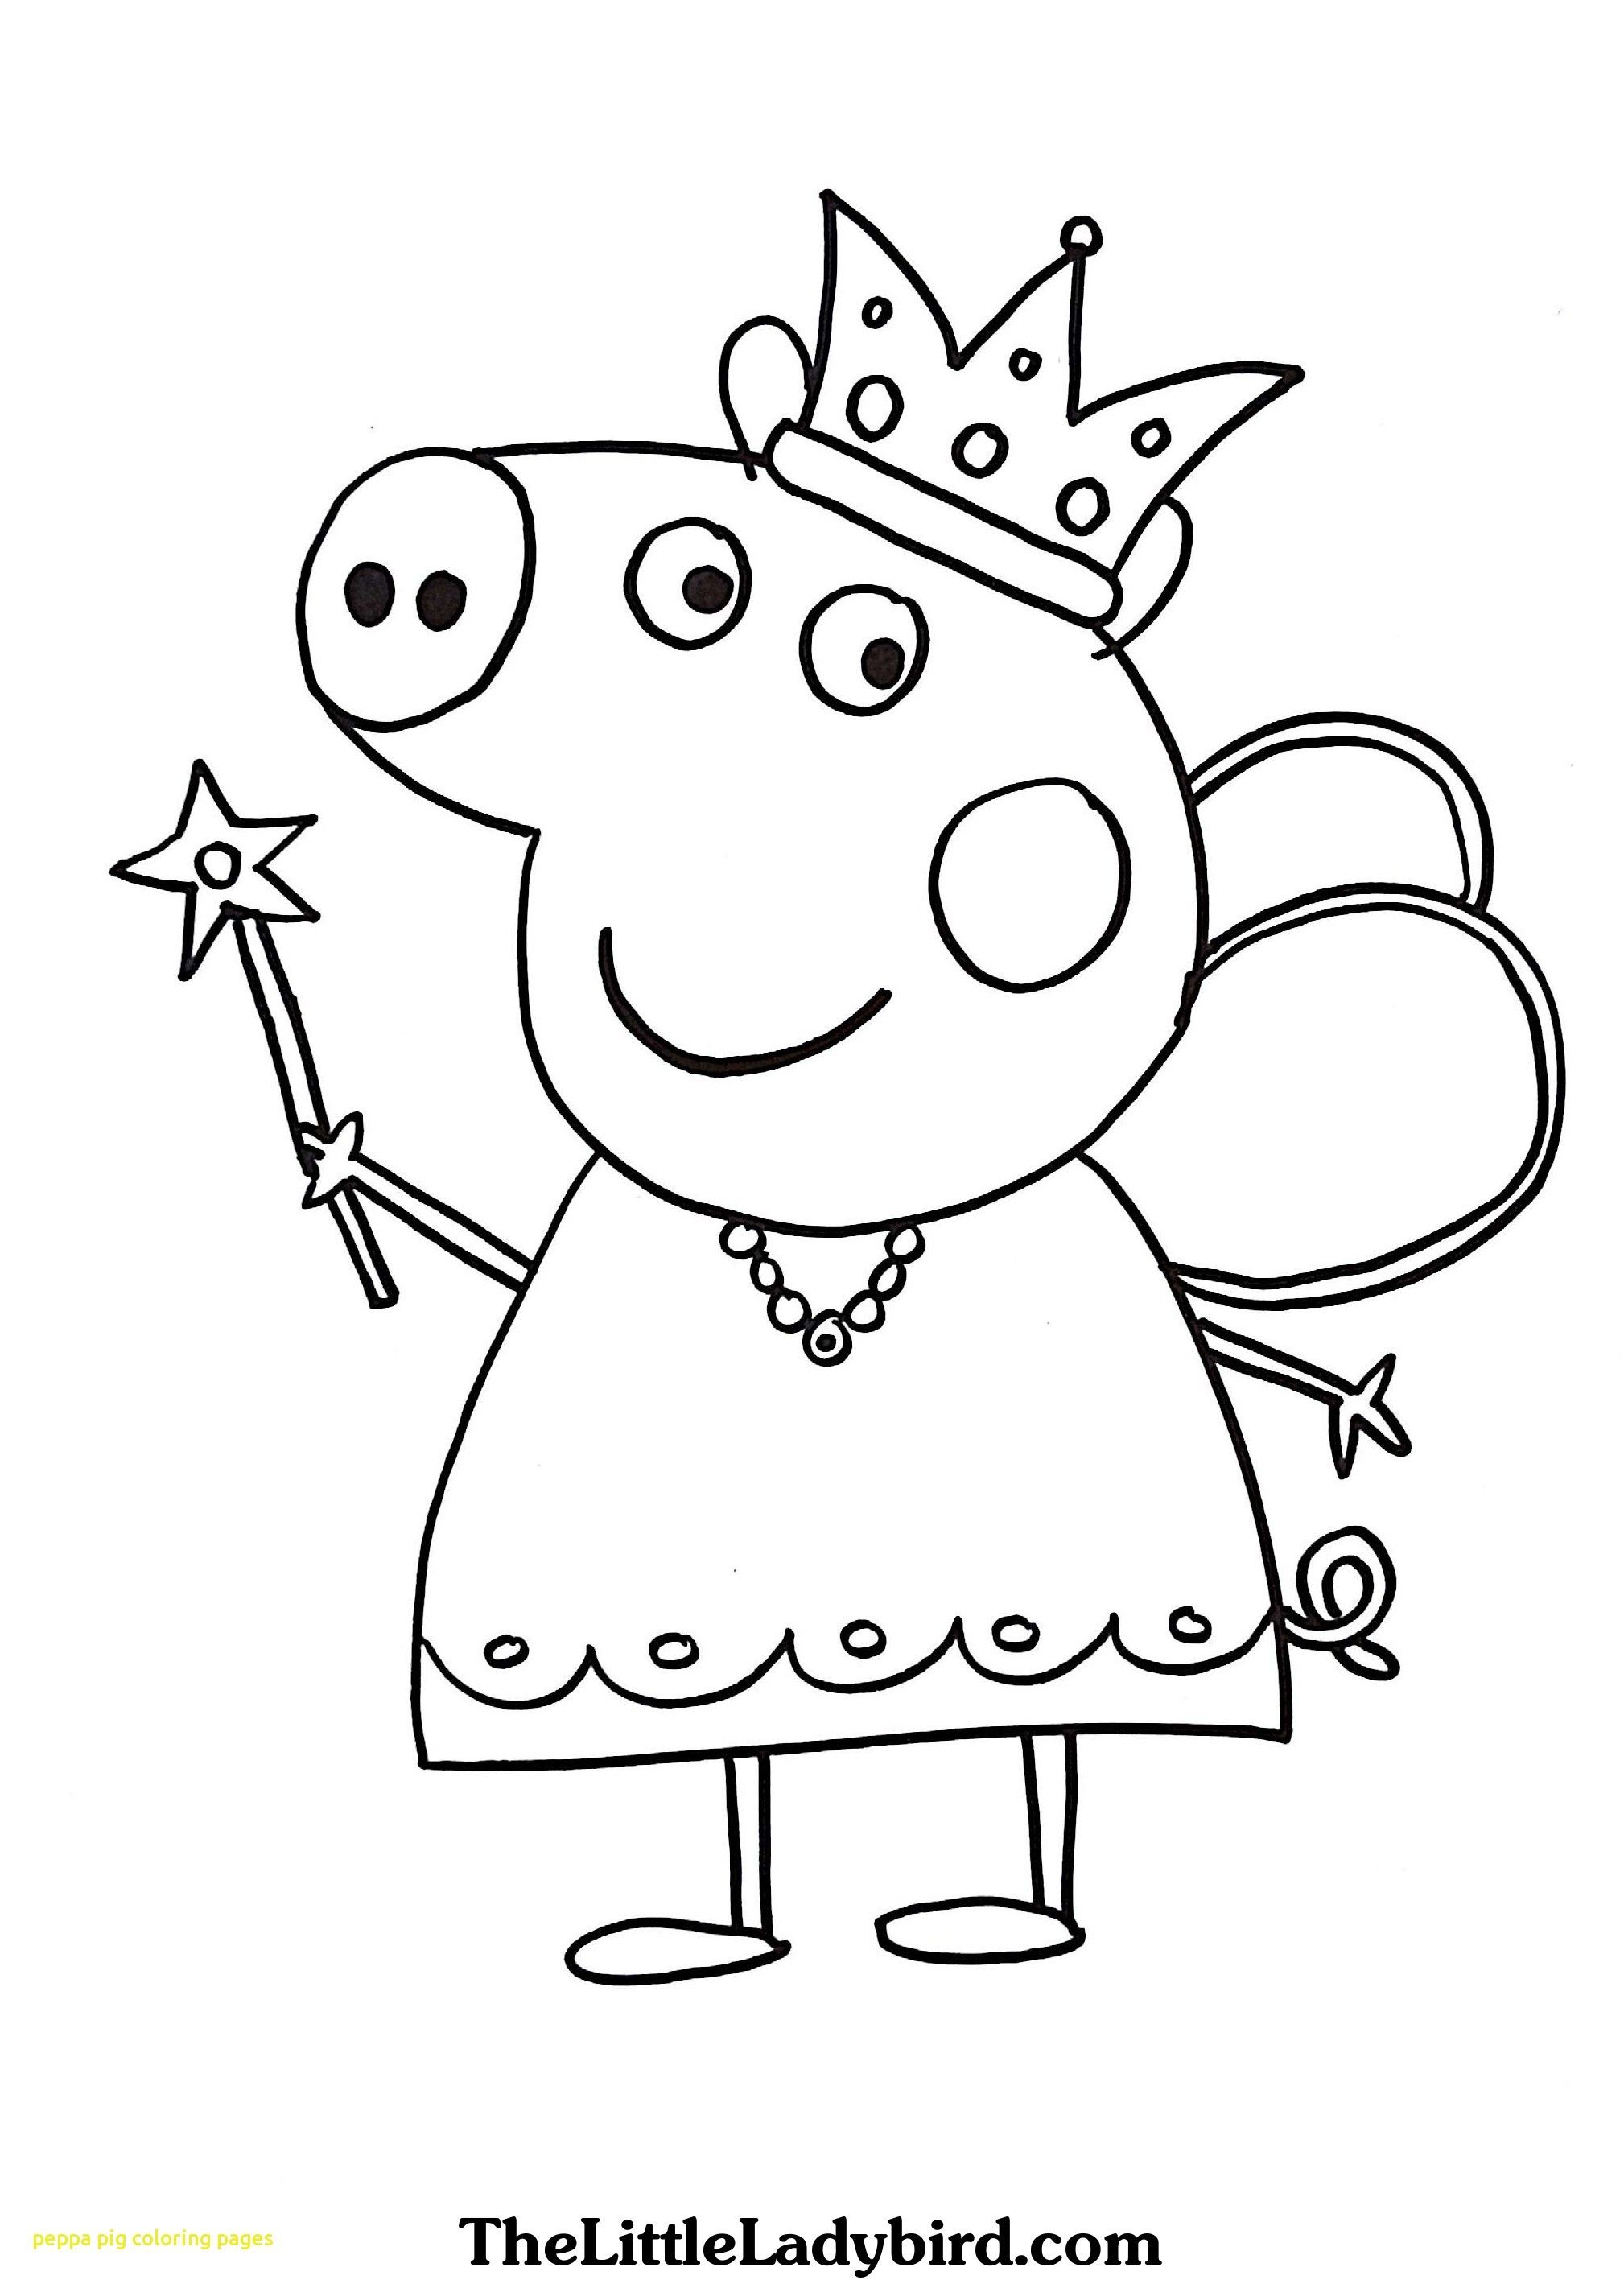 Image result for peppa pig coloring pages | Peppa pig coloring pages, Peppa  pig colouring, Halloween coloring pages printable